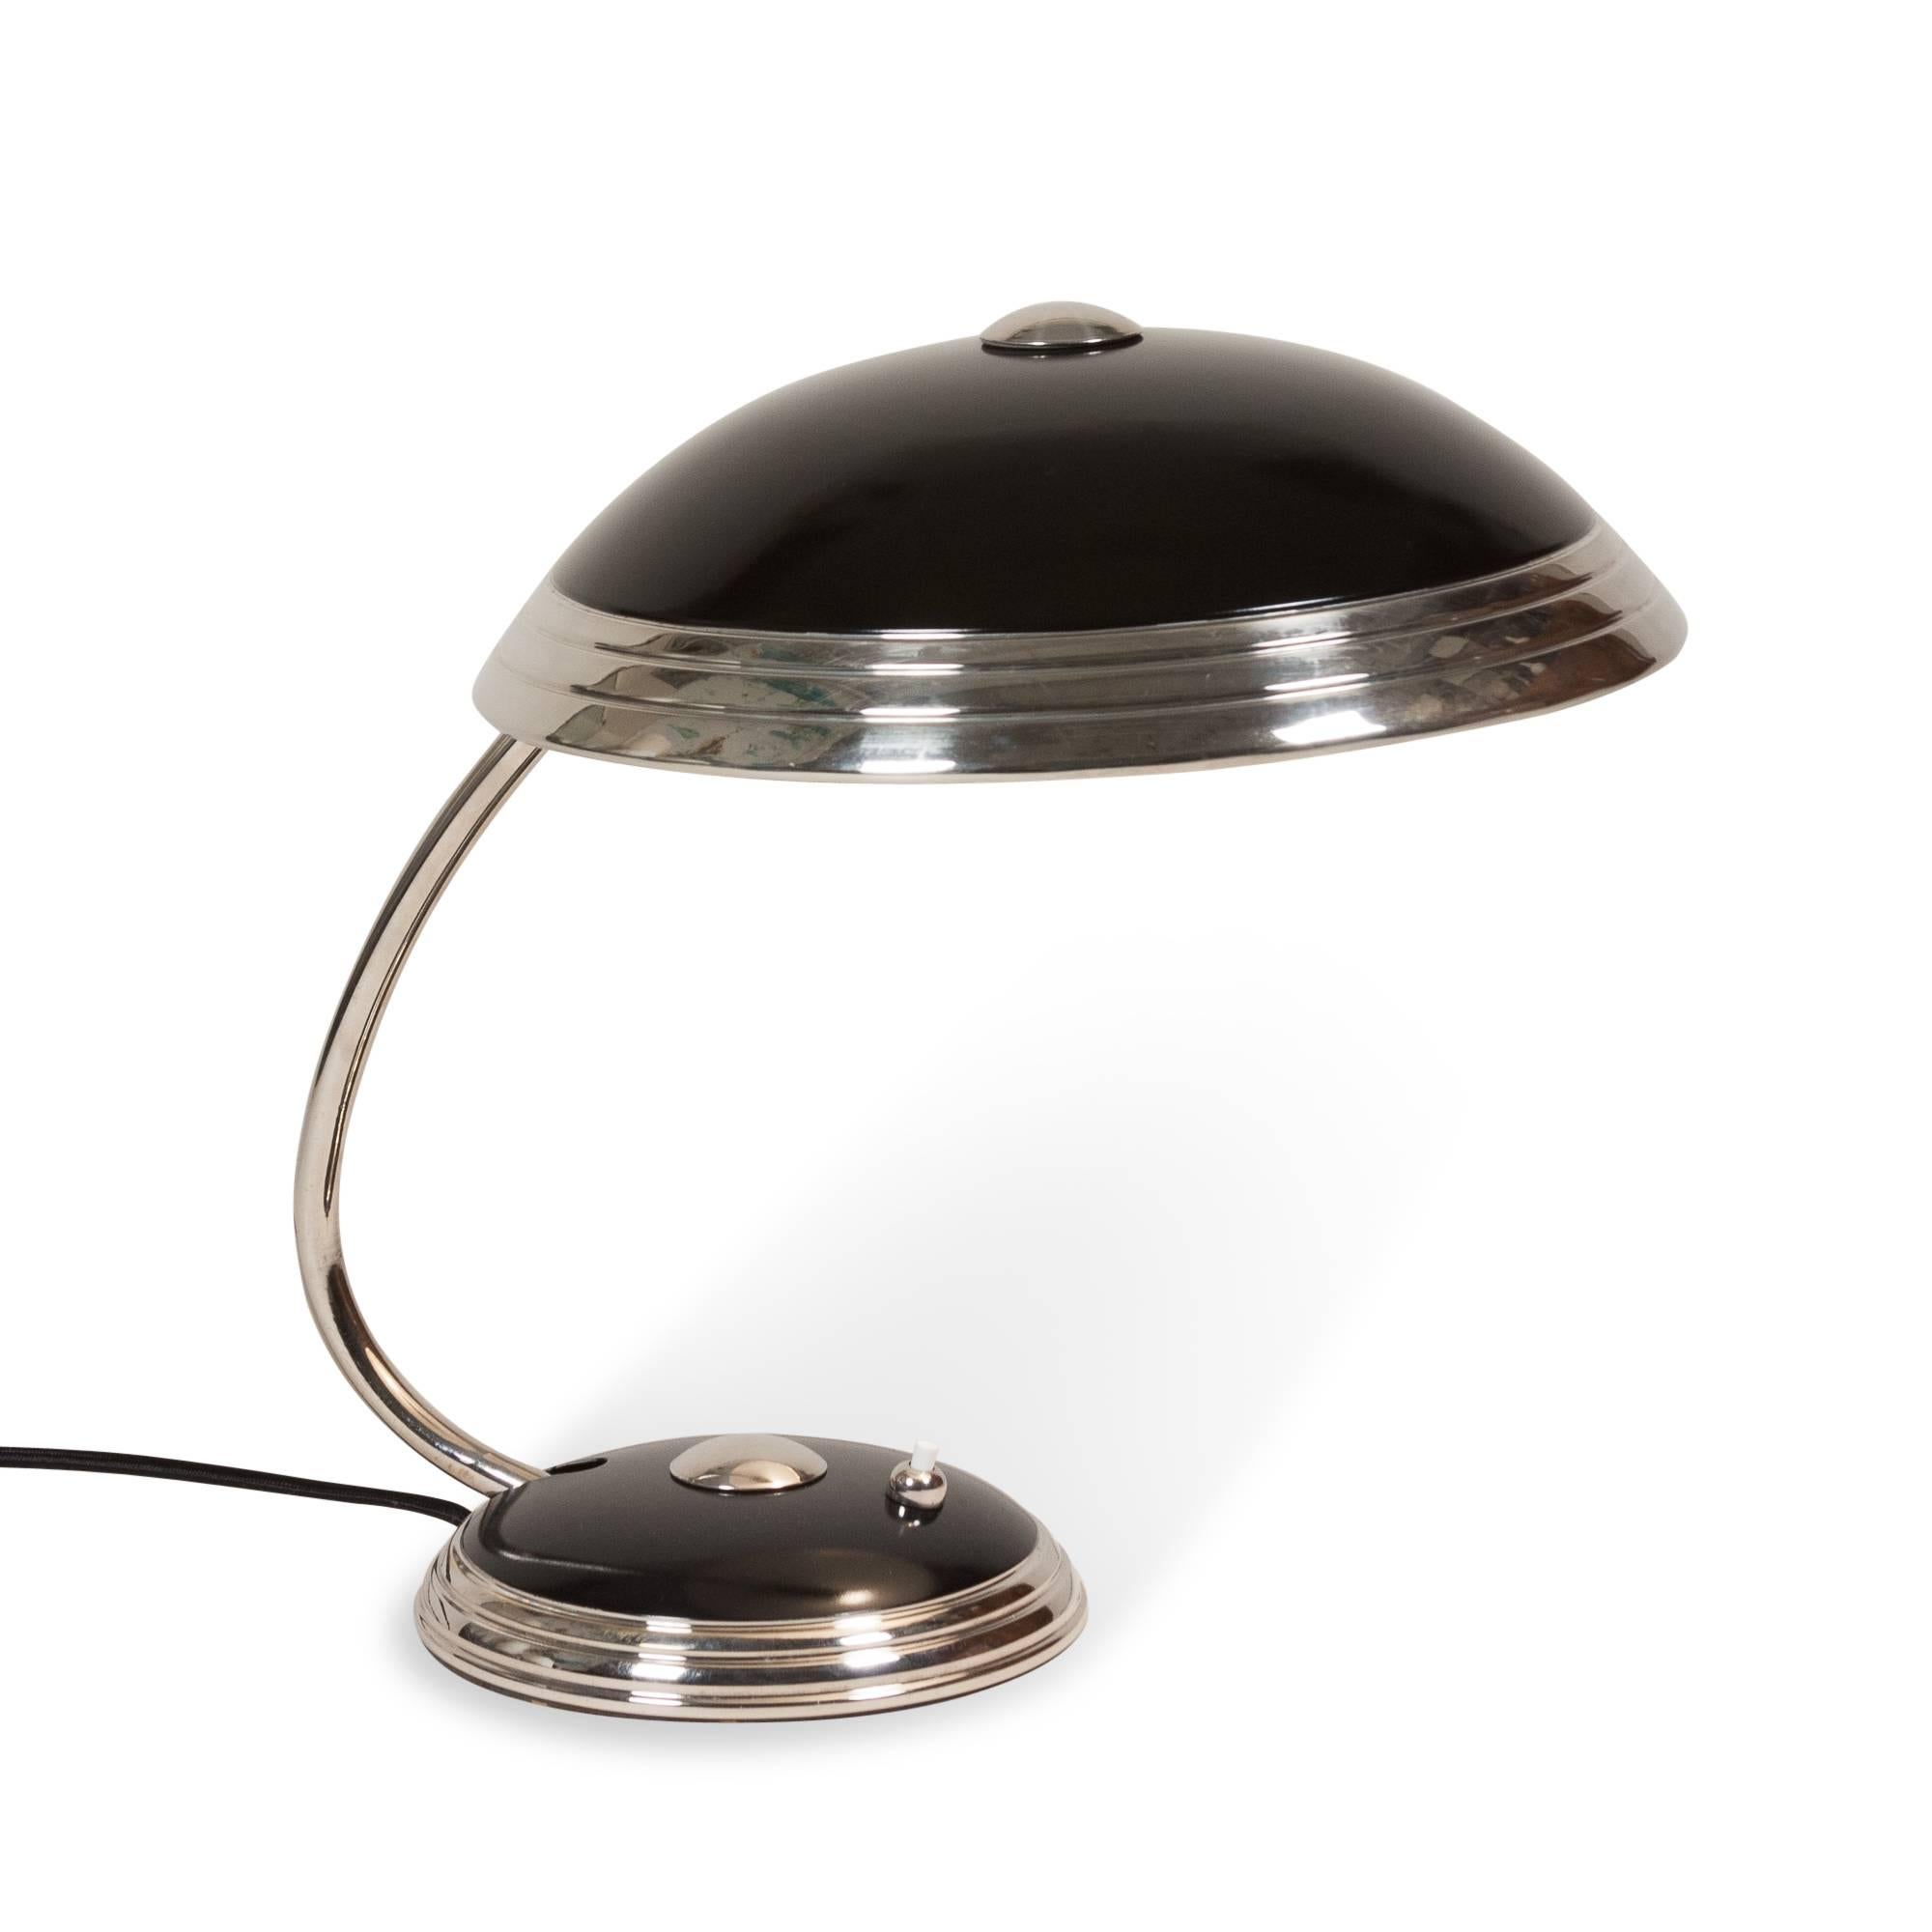 Chrome and black lacquered metal dome desk lamp, the shade as well as the arm pivoting up and down, by Helo, German, 1950s. Signed to underside. Measures: Height 14 in, diameter of shade 12 1/4 in.